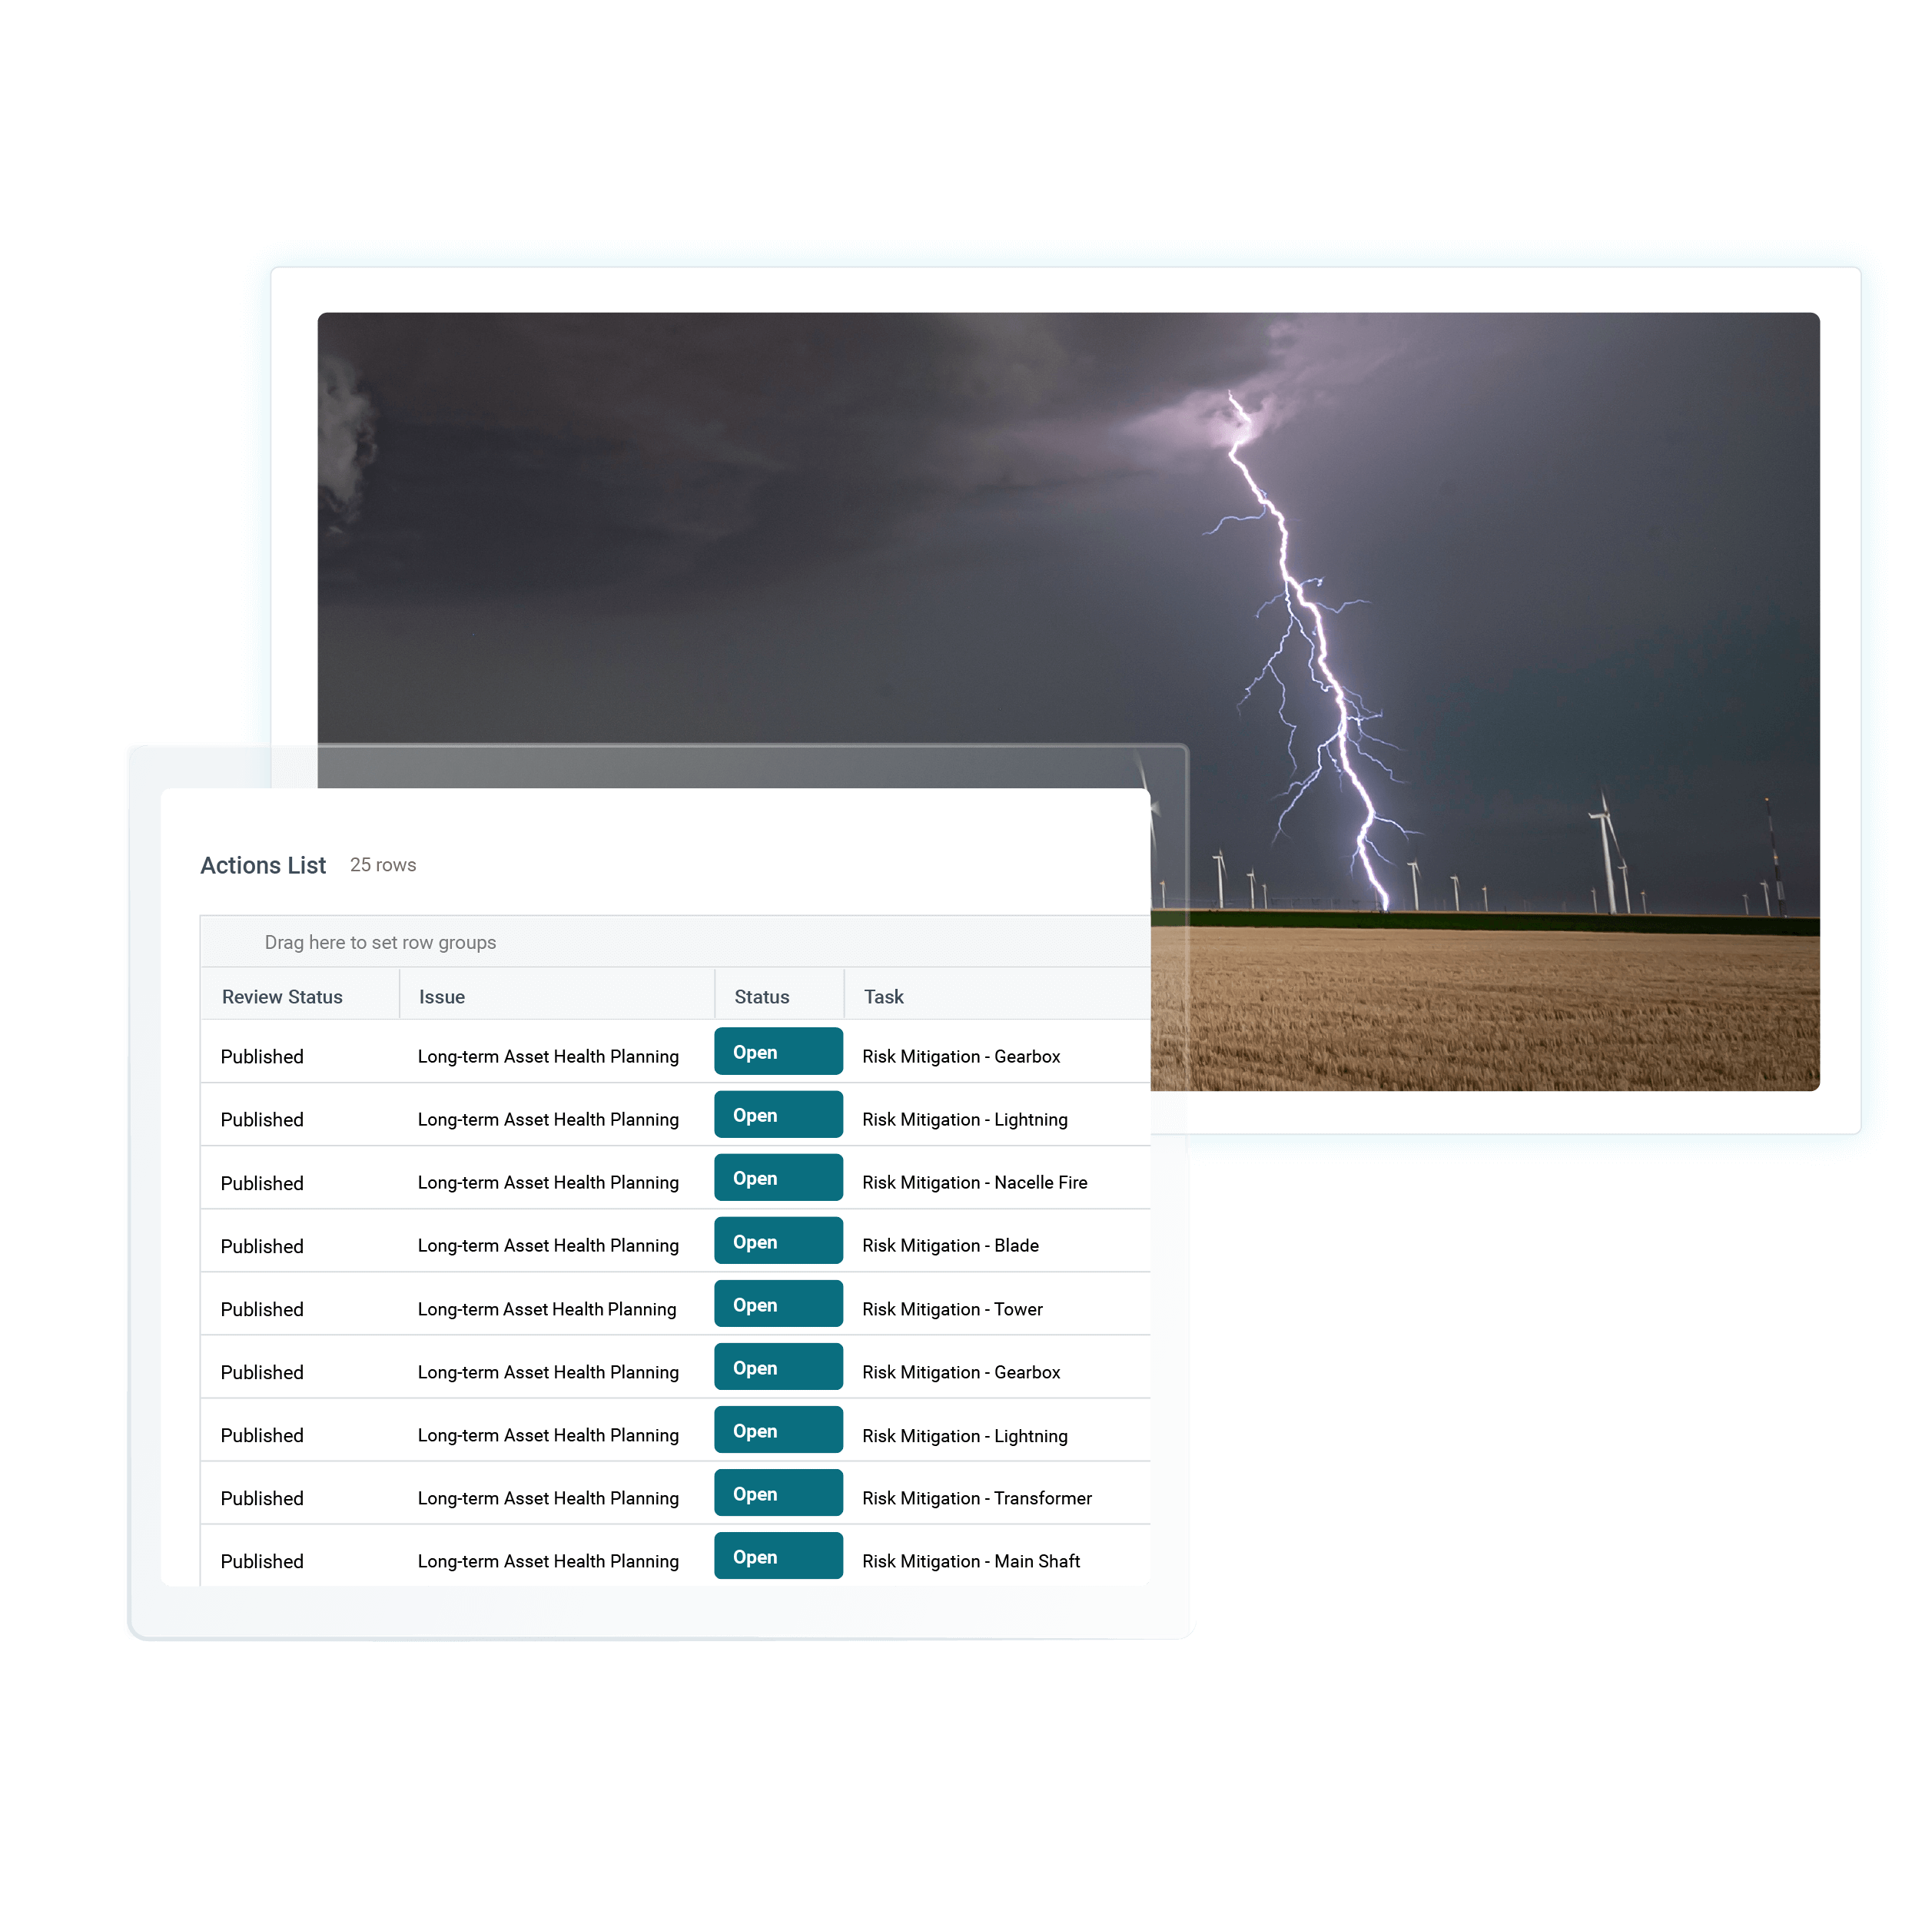 Image of lighting striking a wind turbine with a screenshot of Clir's action panel 